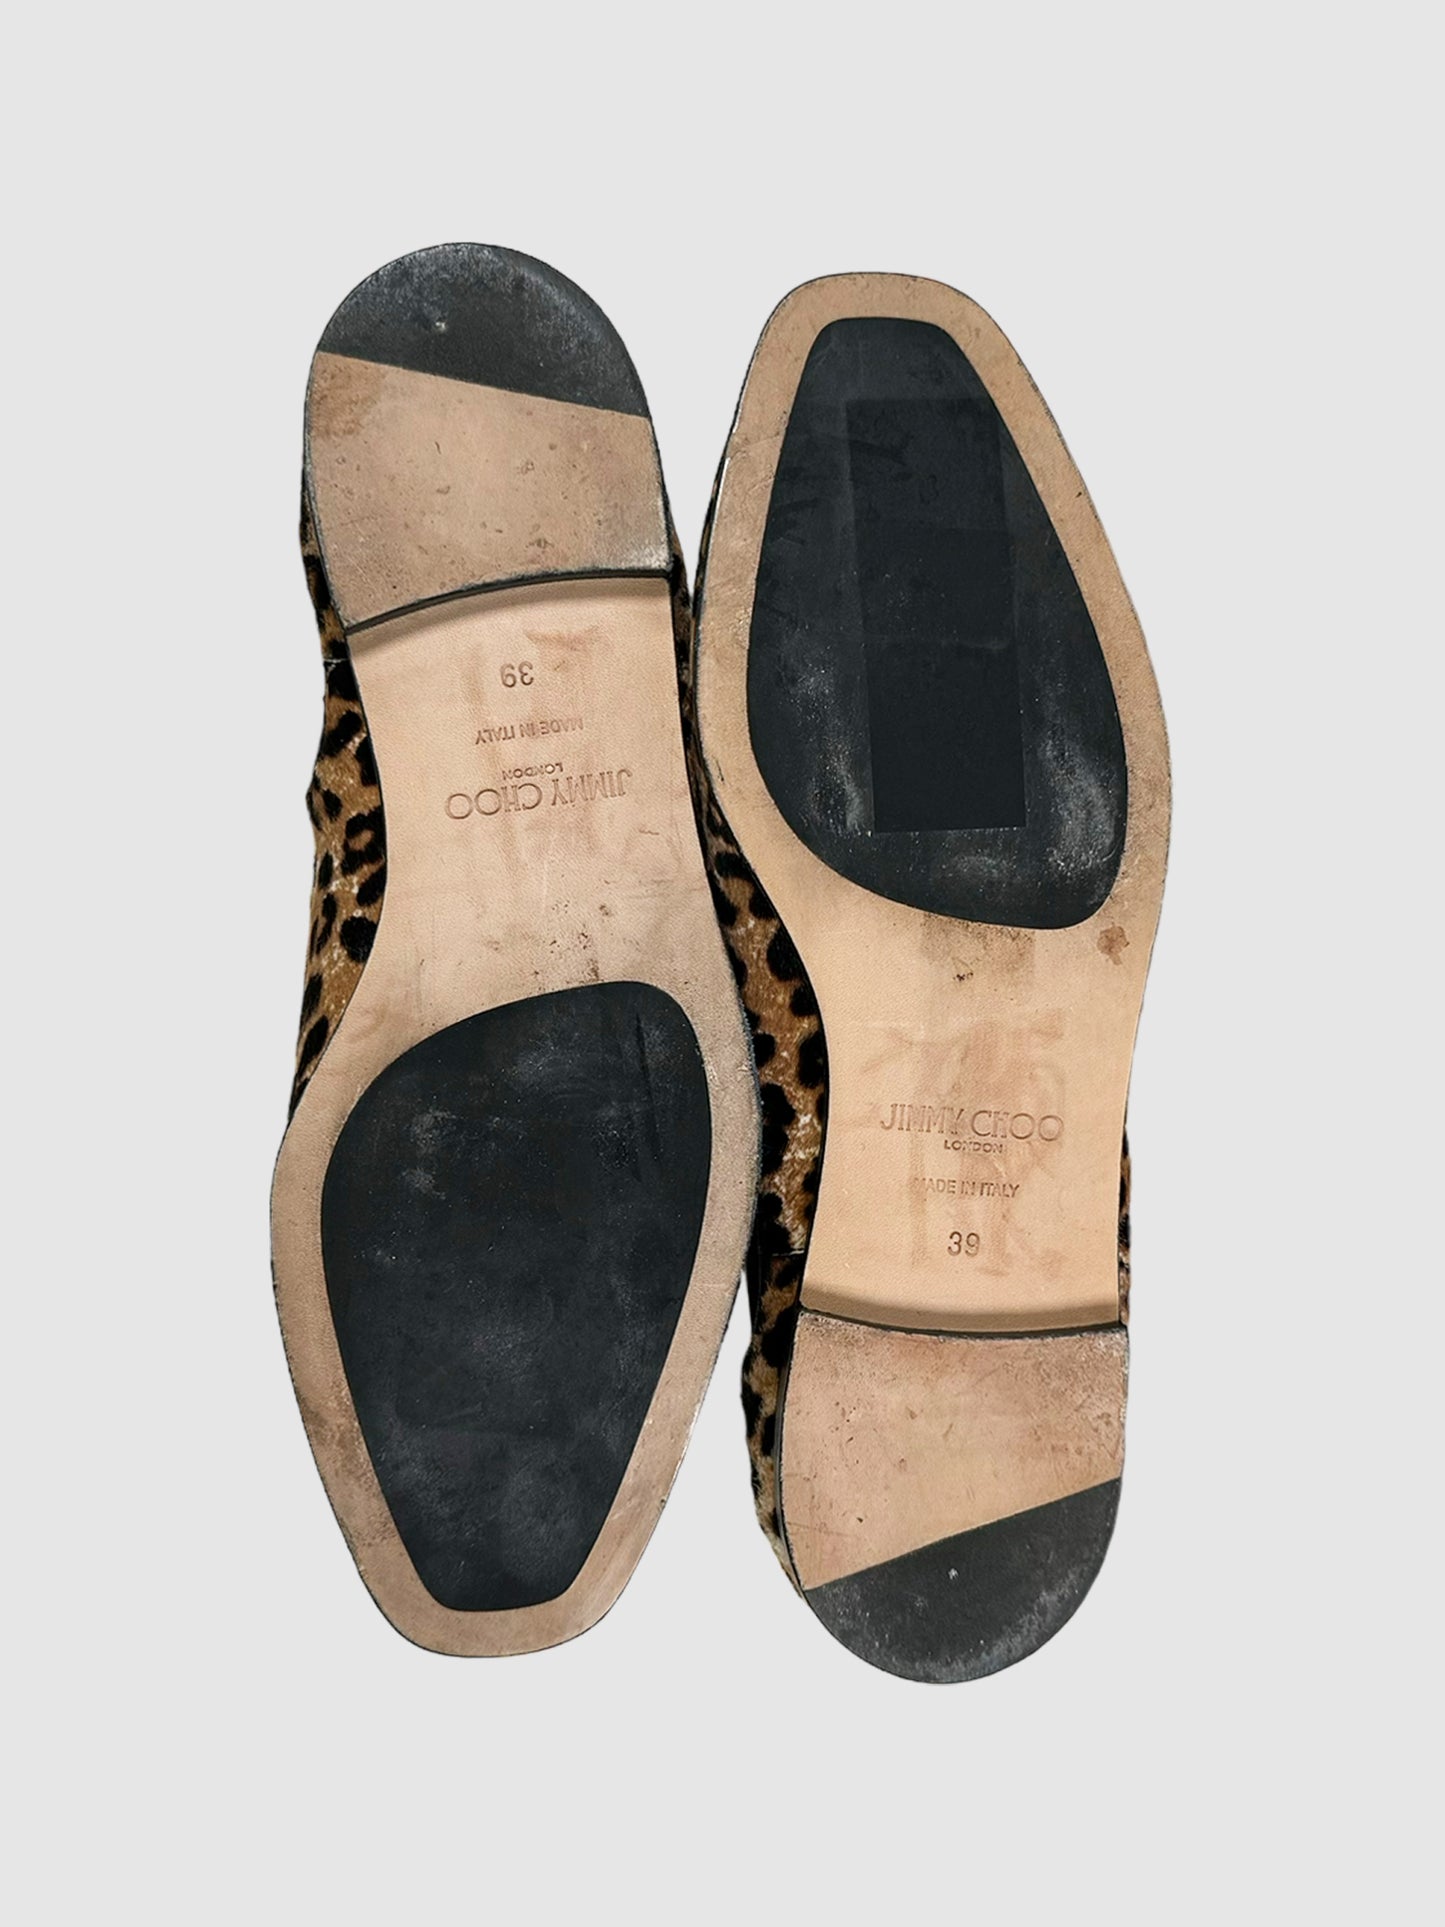 Leopard Print Loafers - Size 39